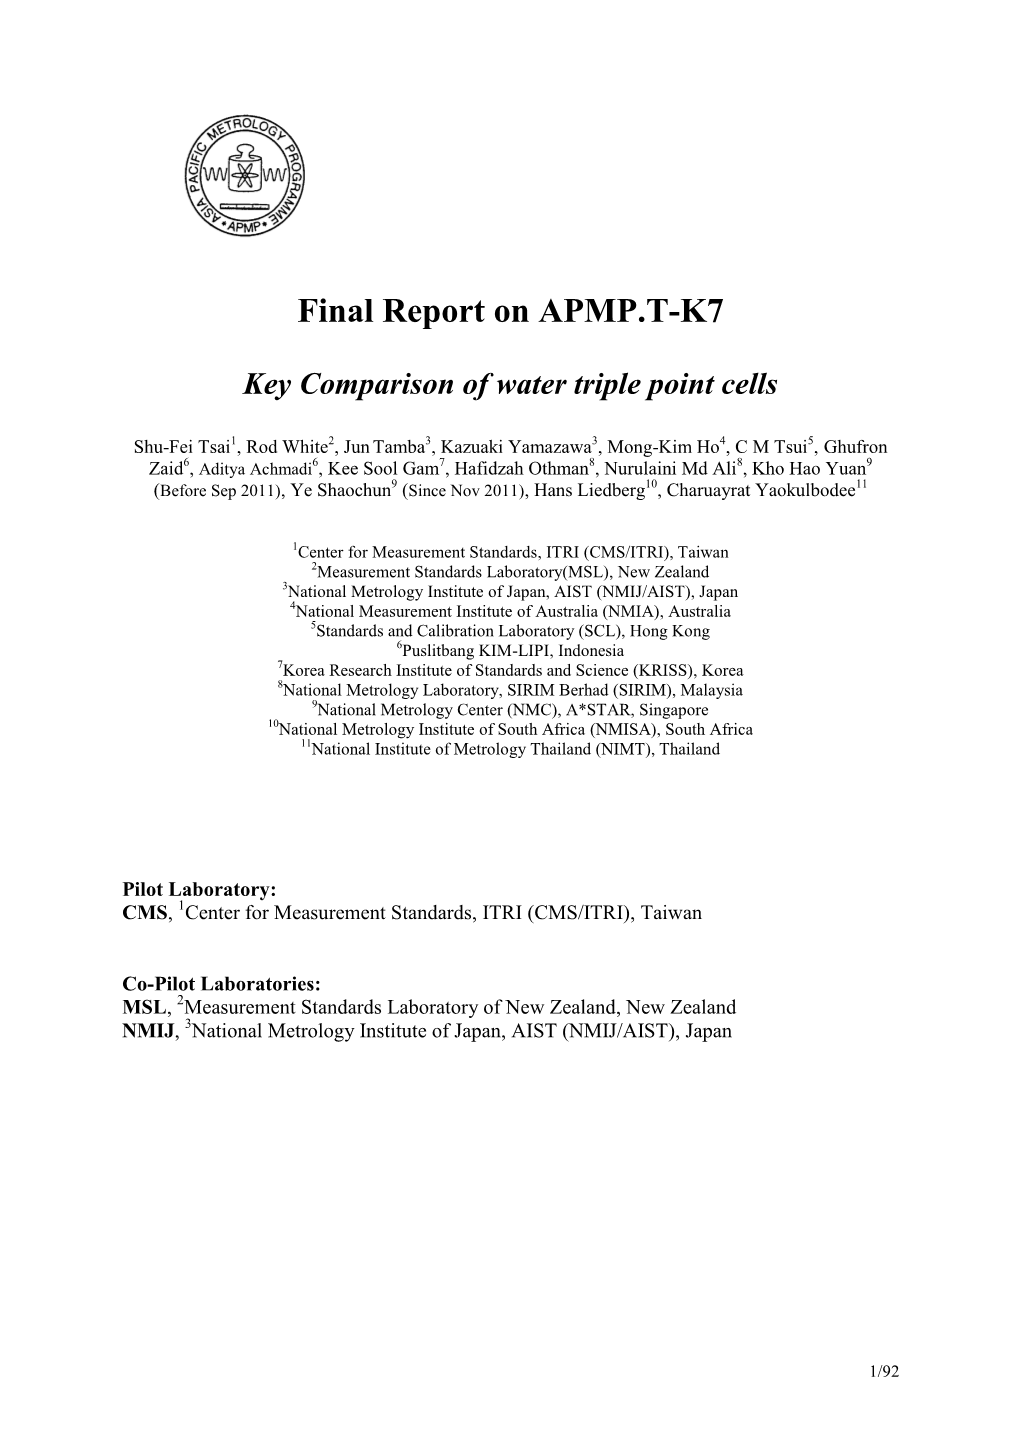 Protocol for the CCT Comparison of Water Triple Point Cells